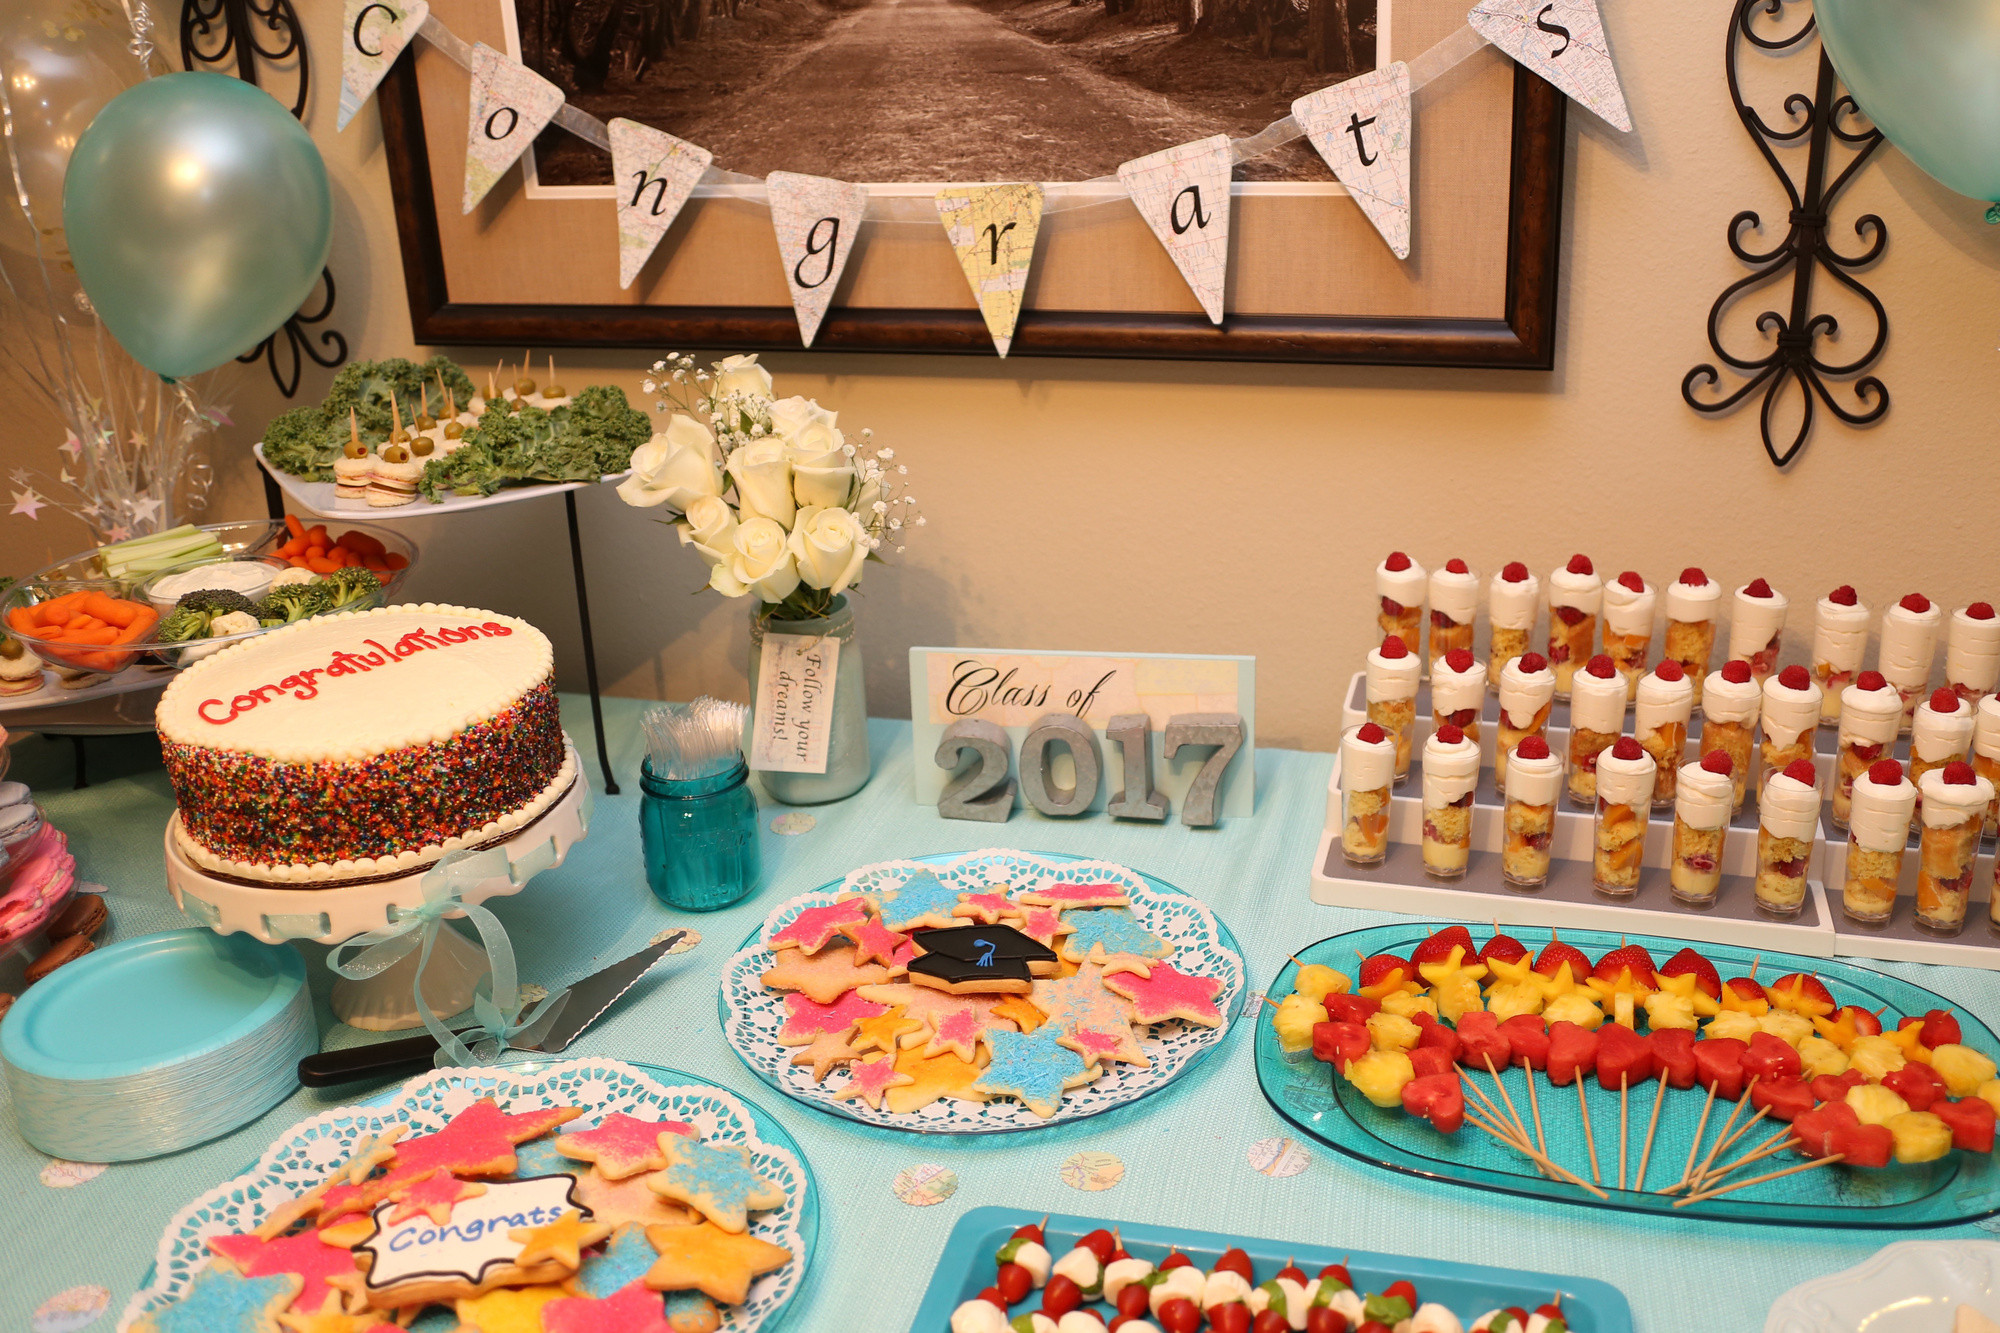 Food For Graduation Party Ideas
 9 Incredible Graduation Party Food Ideas